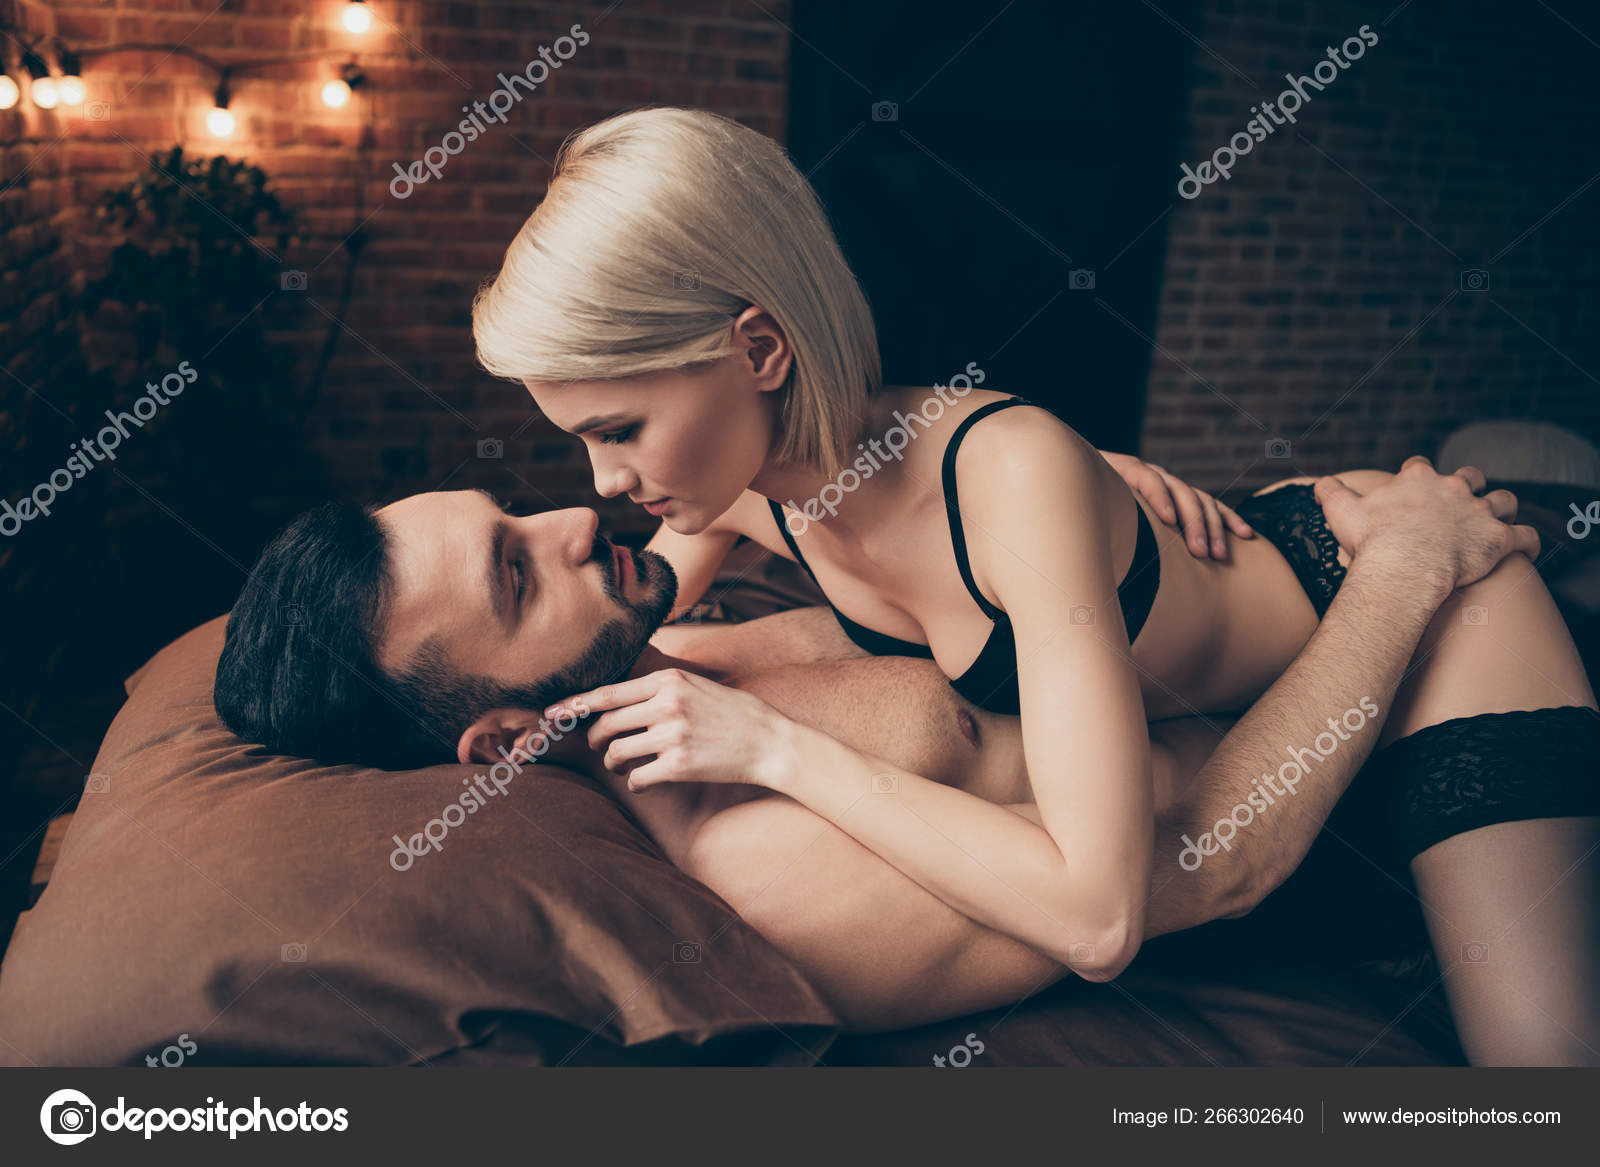 Close up side profile photo two partners people having sex kiss look eyes she her lady